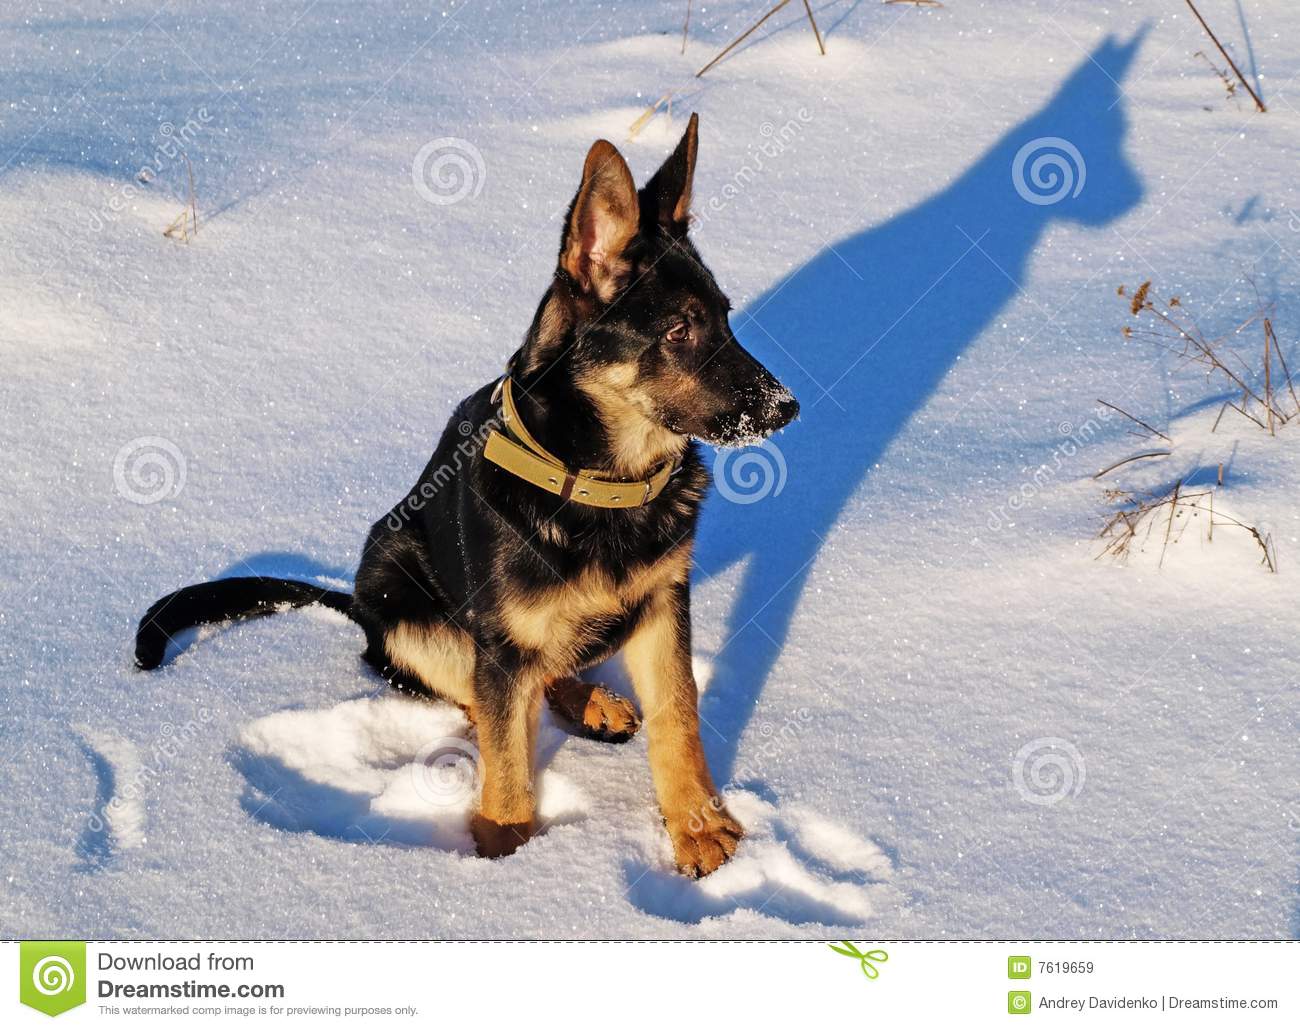 Dog To Ball And His Shade  Royalty Free Stock Images   Image  7619659